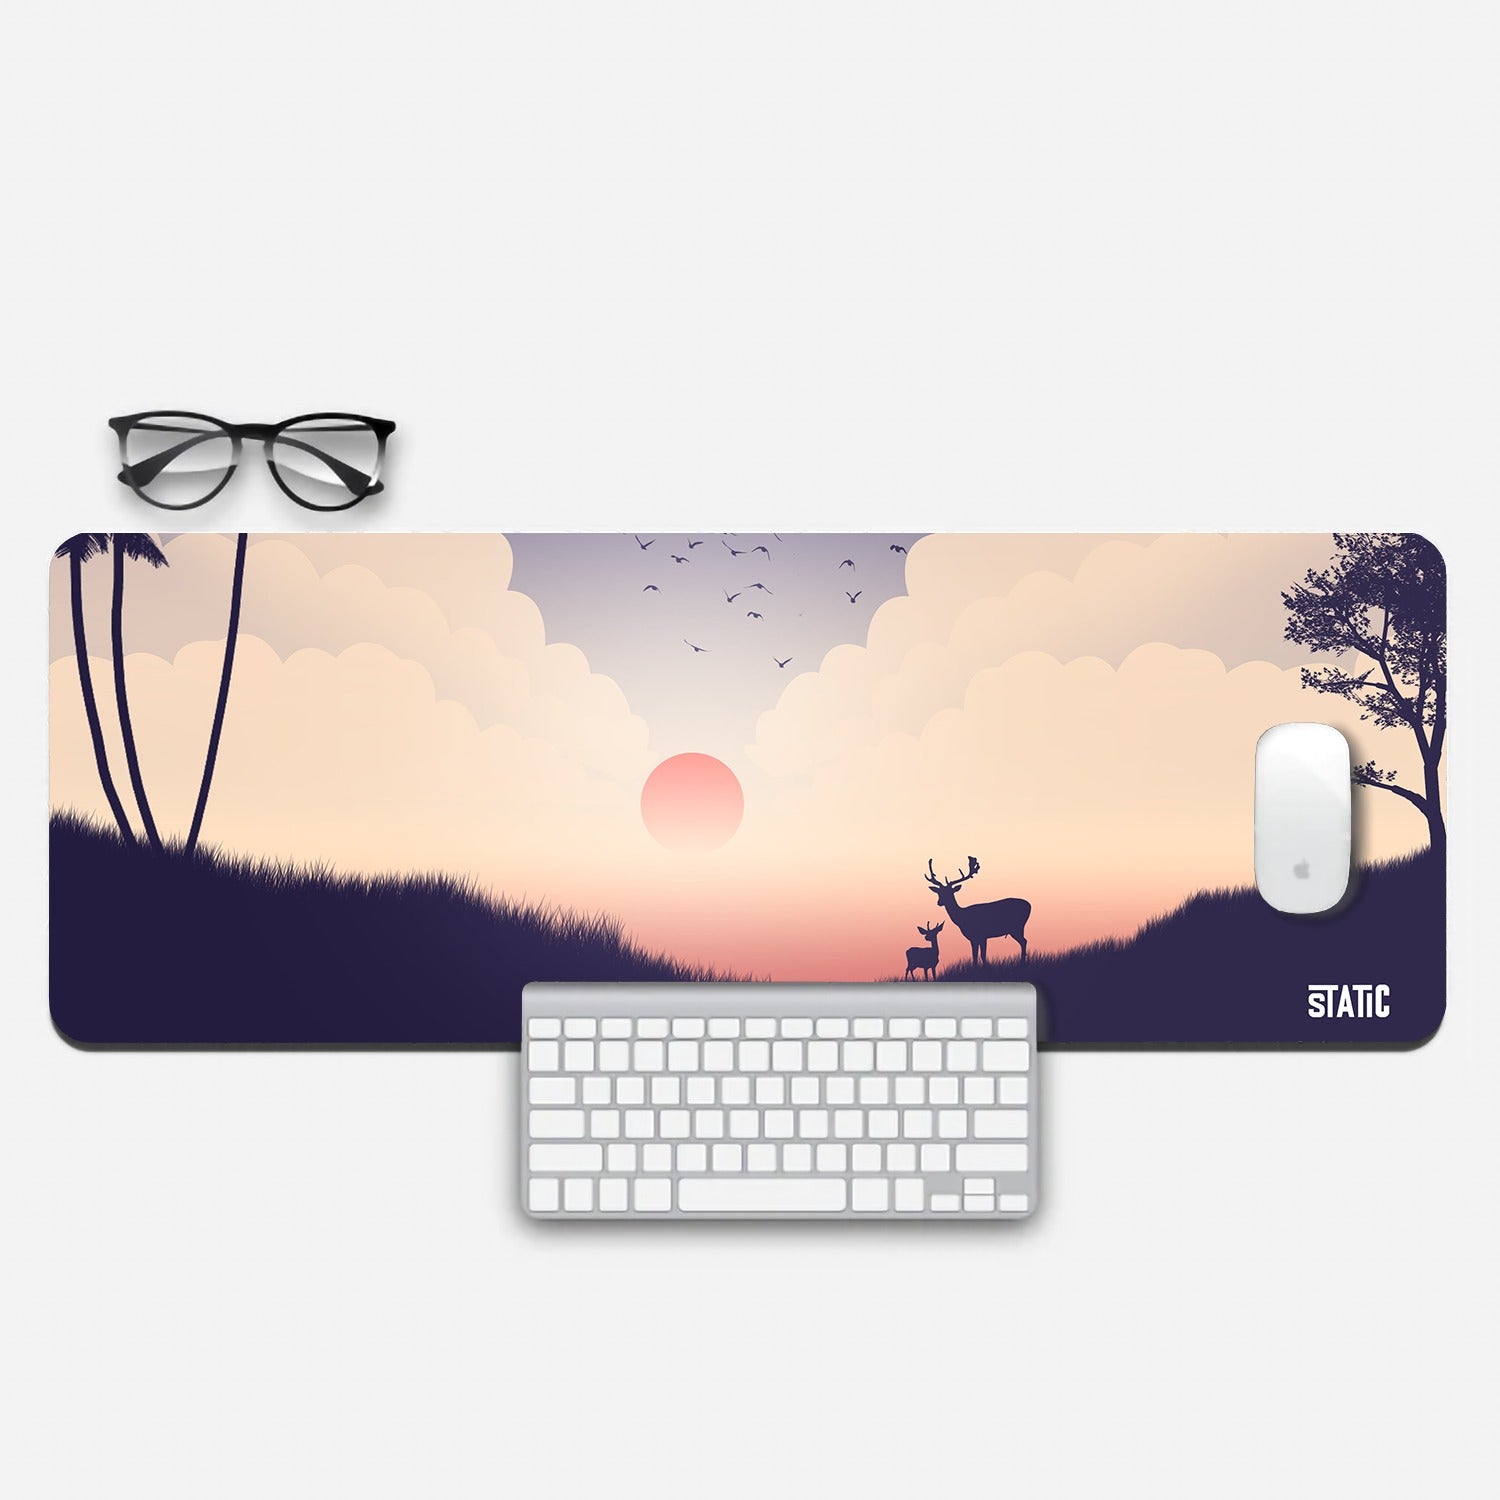 Transform your gaming space with our extended mouse pad – Enchanted Forest Edition. Immerse yourself in a captivating scene featuring the silhouettes of a majestic deer and its fawn against a backdrop of a radiant red sun rising above the fog-covered landscape. Birds take flight, and clouds encircle the sun, creating an ethereal ambiance. Elevate your gaming experience and workspace aesthetics with this enchanting mouse pad. Order now and journey into the beauty of the enchanted forest.